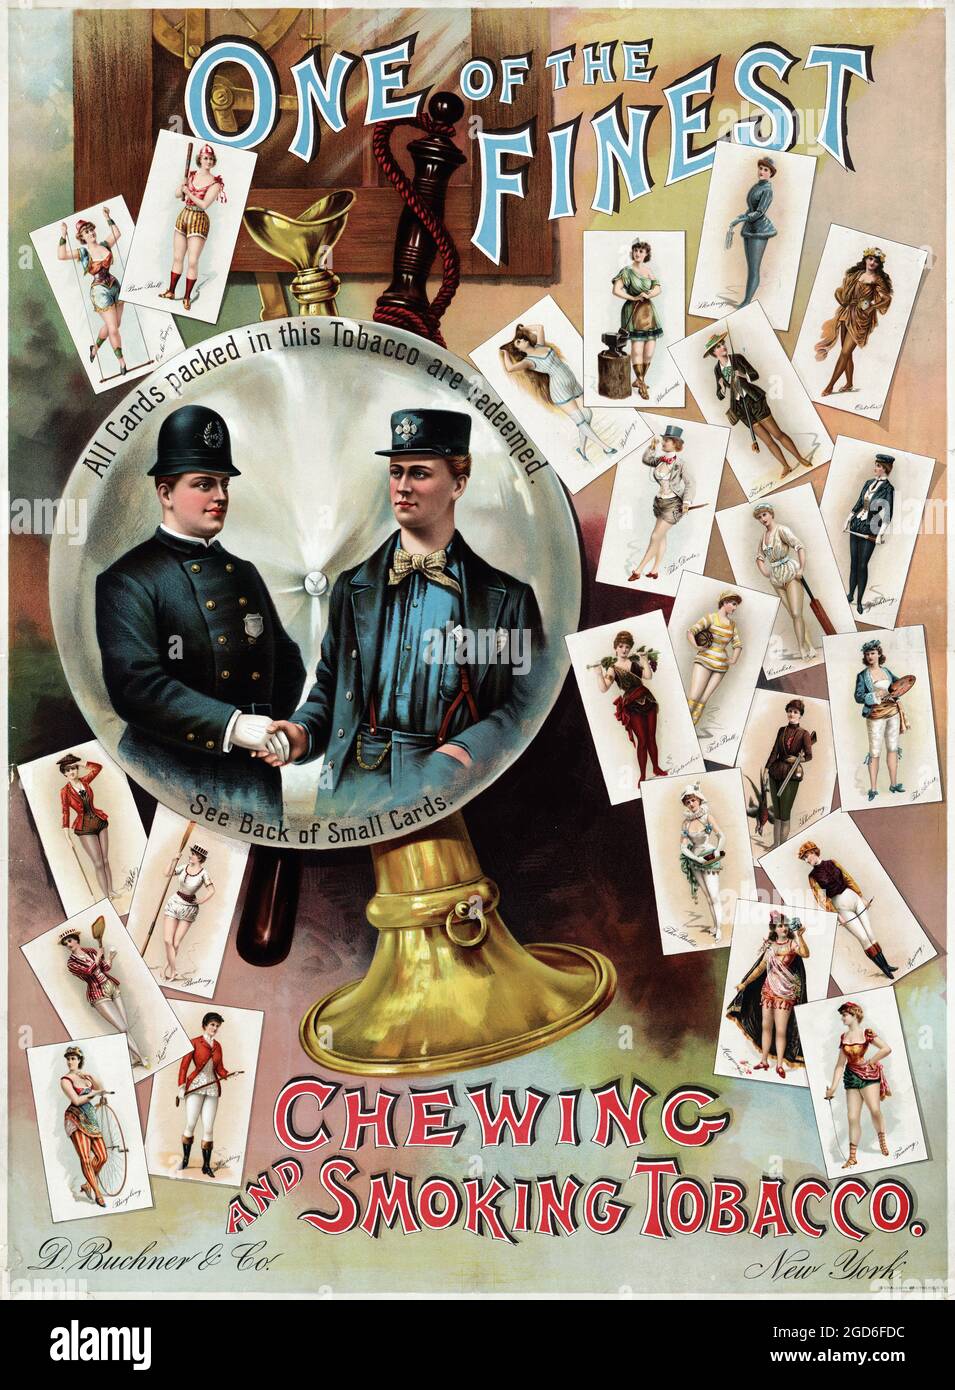 One of the finest Chewing and Smoking Tobacco, poster for tobacco collecting cards, ca. 1890 Stock Photo